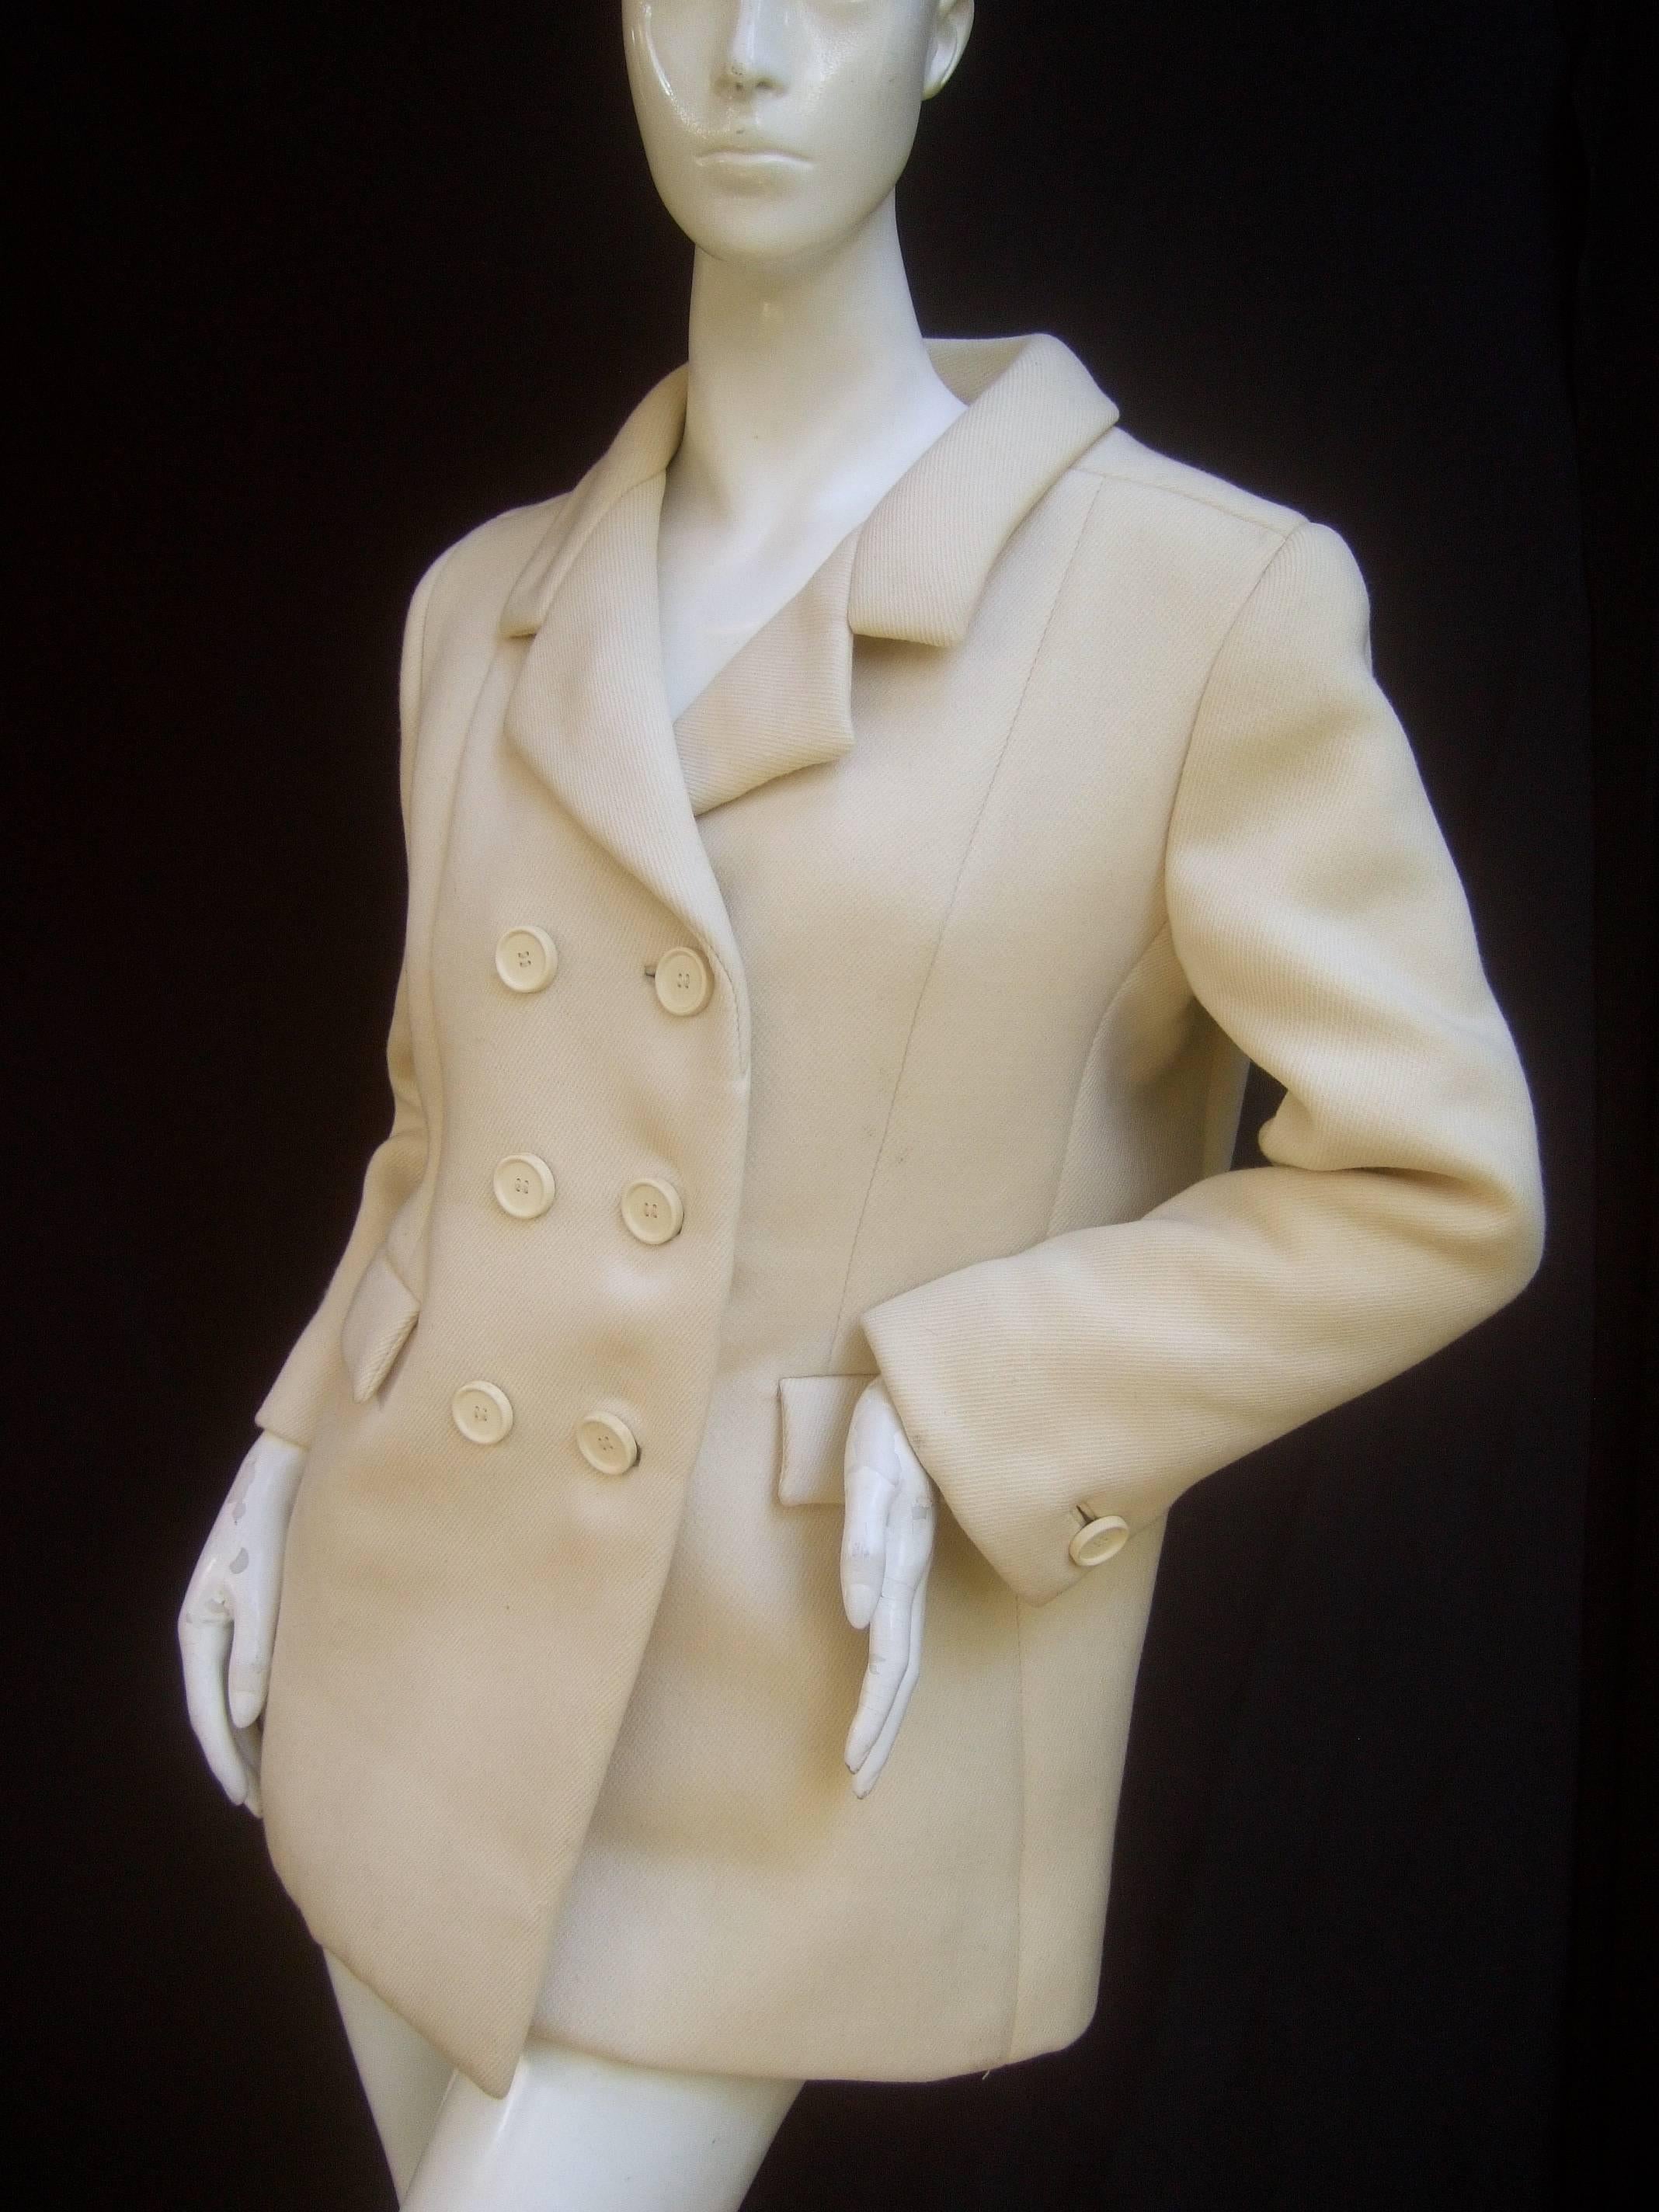 Norman Norell Couture cream wool jacket c 1970 
The chic retro jacket is designed structured cream
color wool

Adorned with six large white resin buttons on the 
front. Designed with a pair of flap covered pockets
on the front midsection

Labeled: